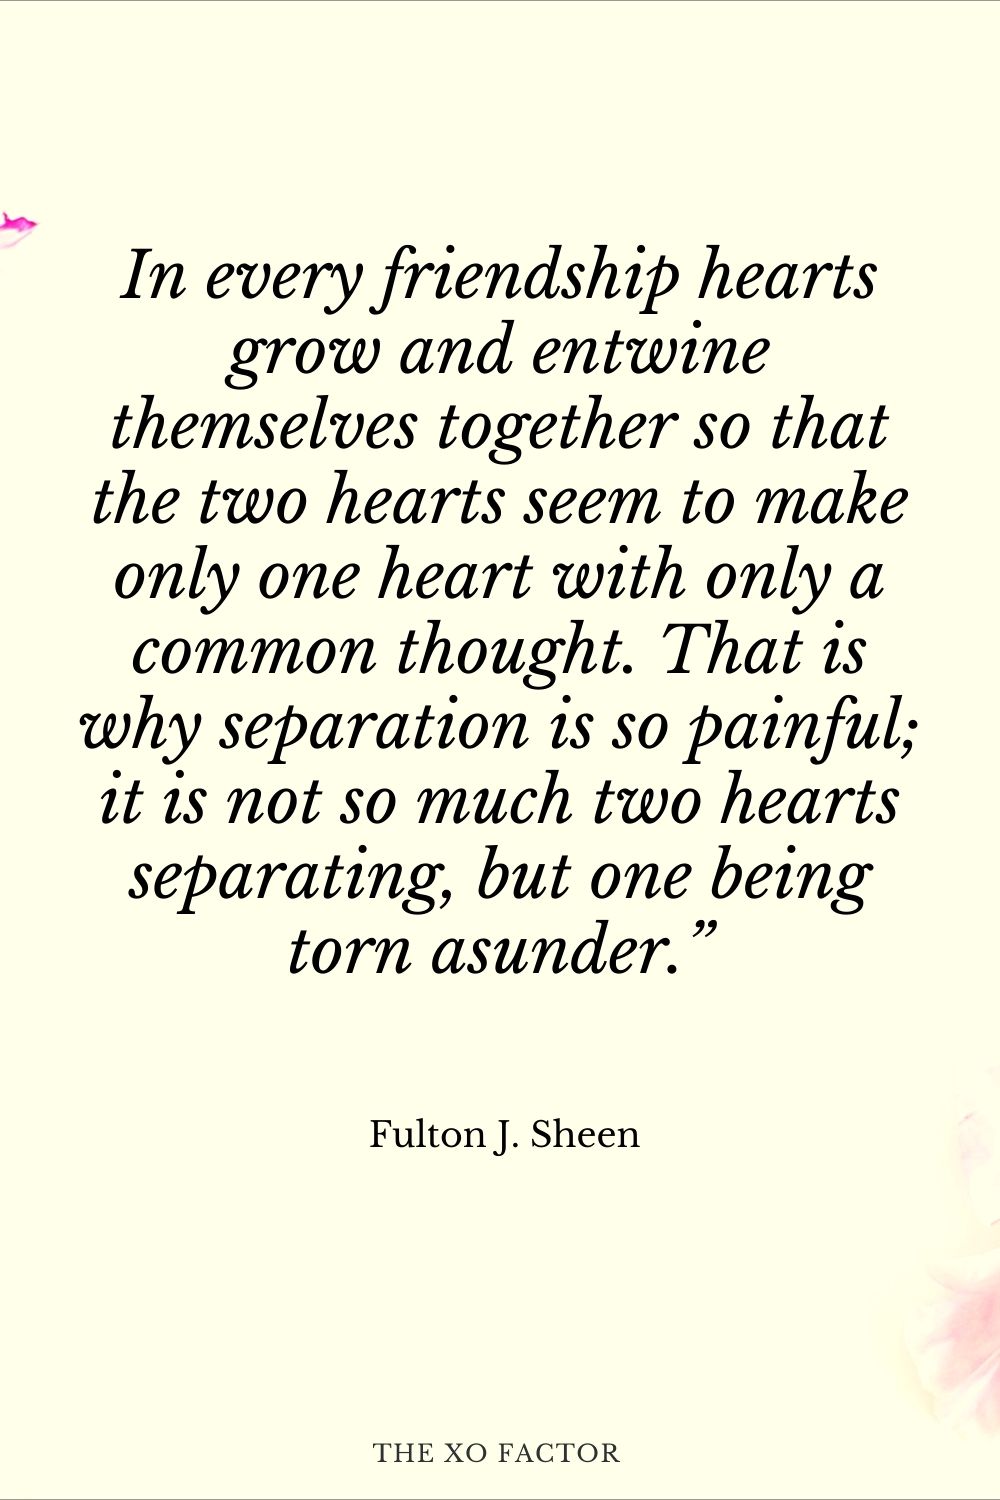 In every friendship hearts grow and entwine themselves together so that the two hearts seem to make only one heart with only a common thought. That is why separation is so painful; it is not so much two hearts separating, but one being torn asunder.” Fulton J. Sheen